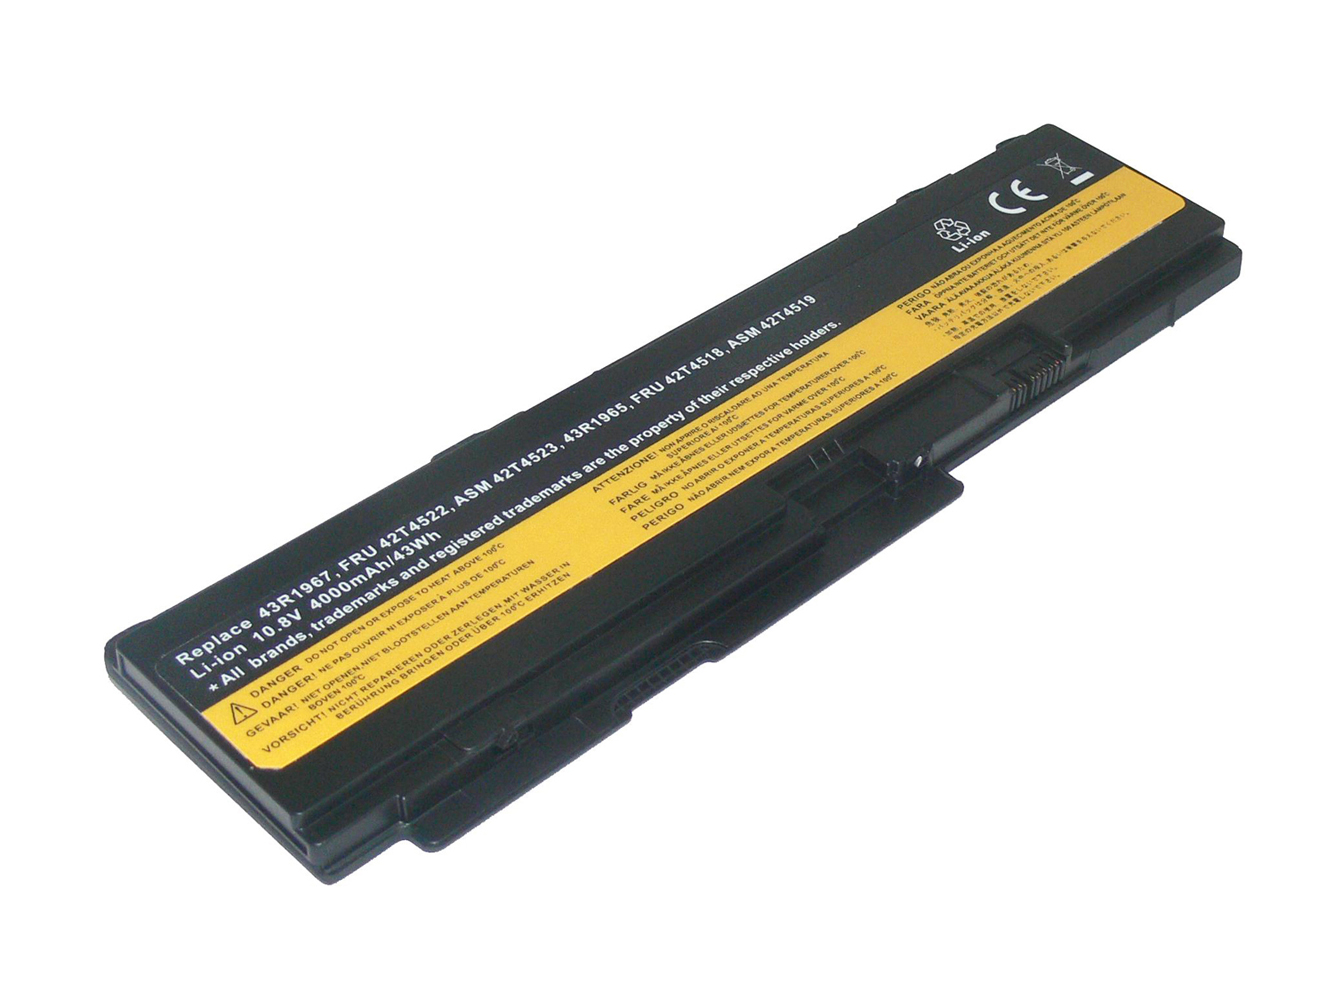 Replacement for LENOVO ThinkPad Reserve Edition 8748, LENOVO ThinkPad X300, X301 Series Laptop Battery